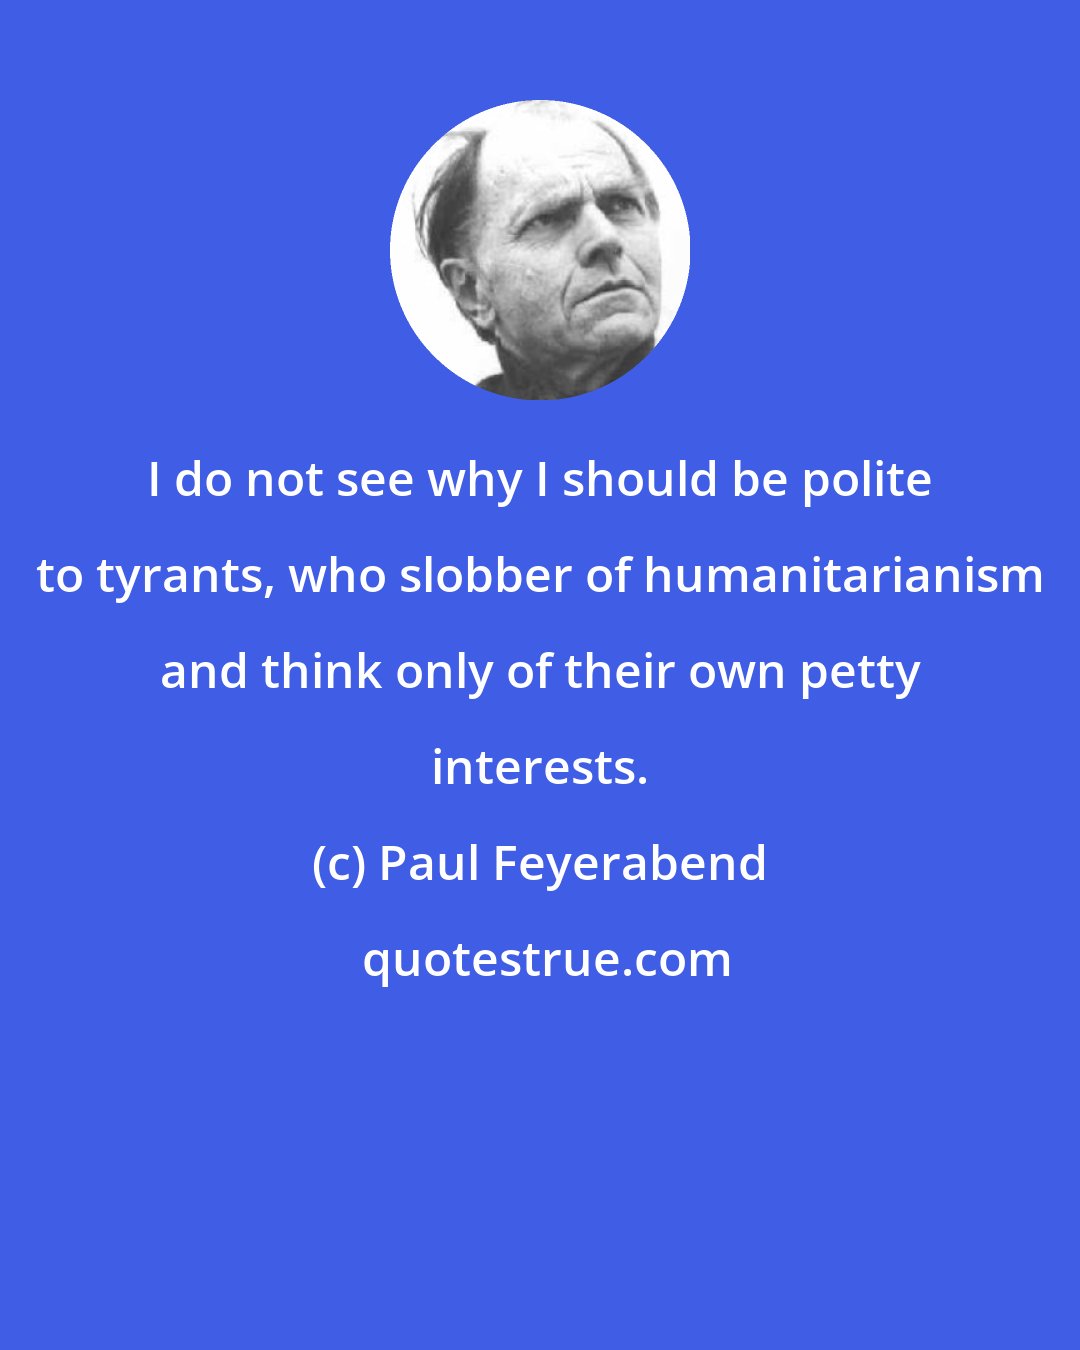 Paul Feyerabend: I do not see why I should be polite to tyrants, who slobber of humanitarianism and think only of their own petty interests.